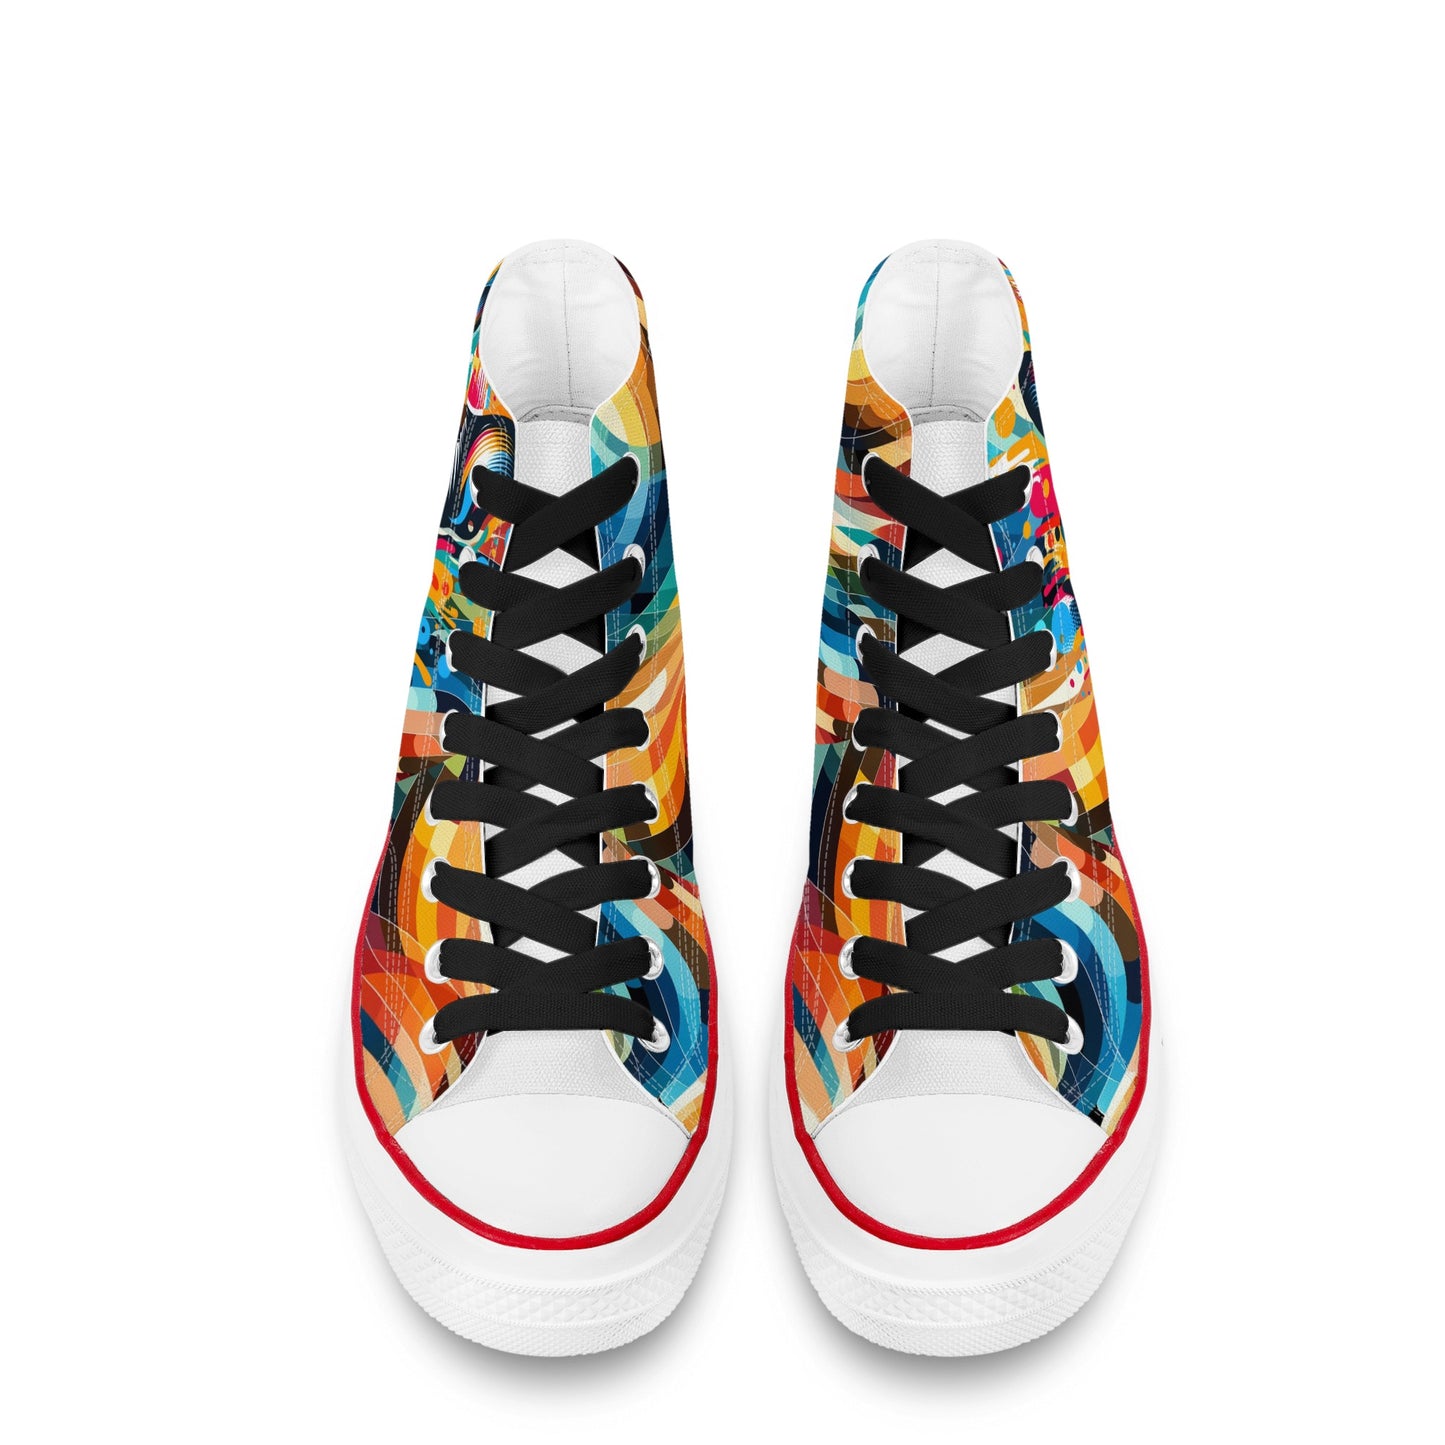 Kobe - Classic High Top Canvas Shoes